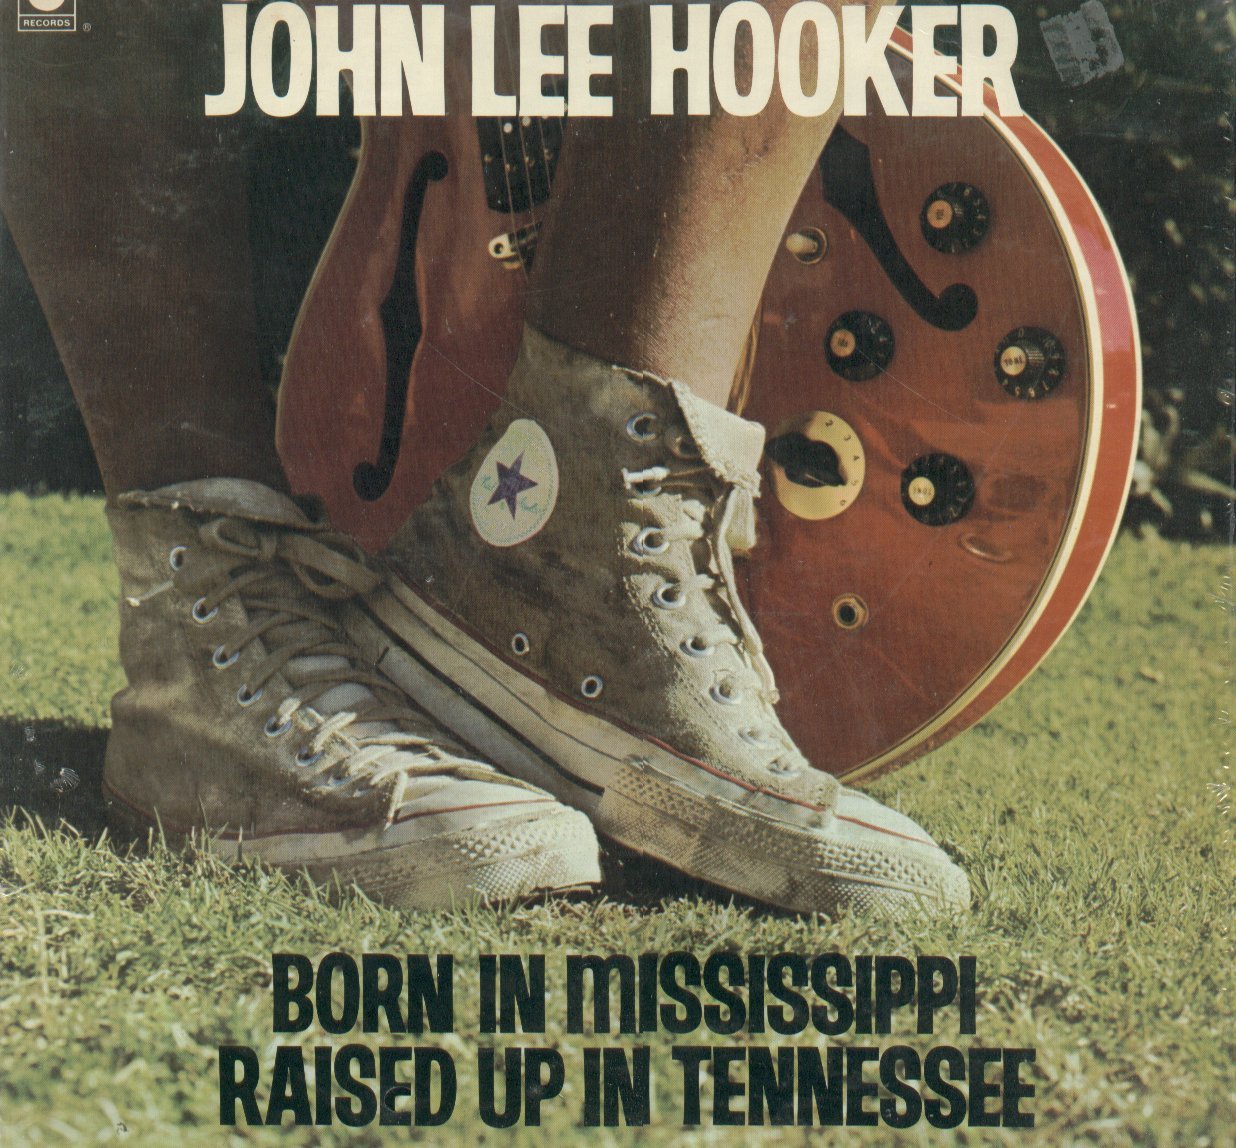 John Lee Hooker - Born in Mississippi, Raised up in Tennessee